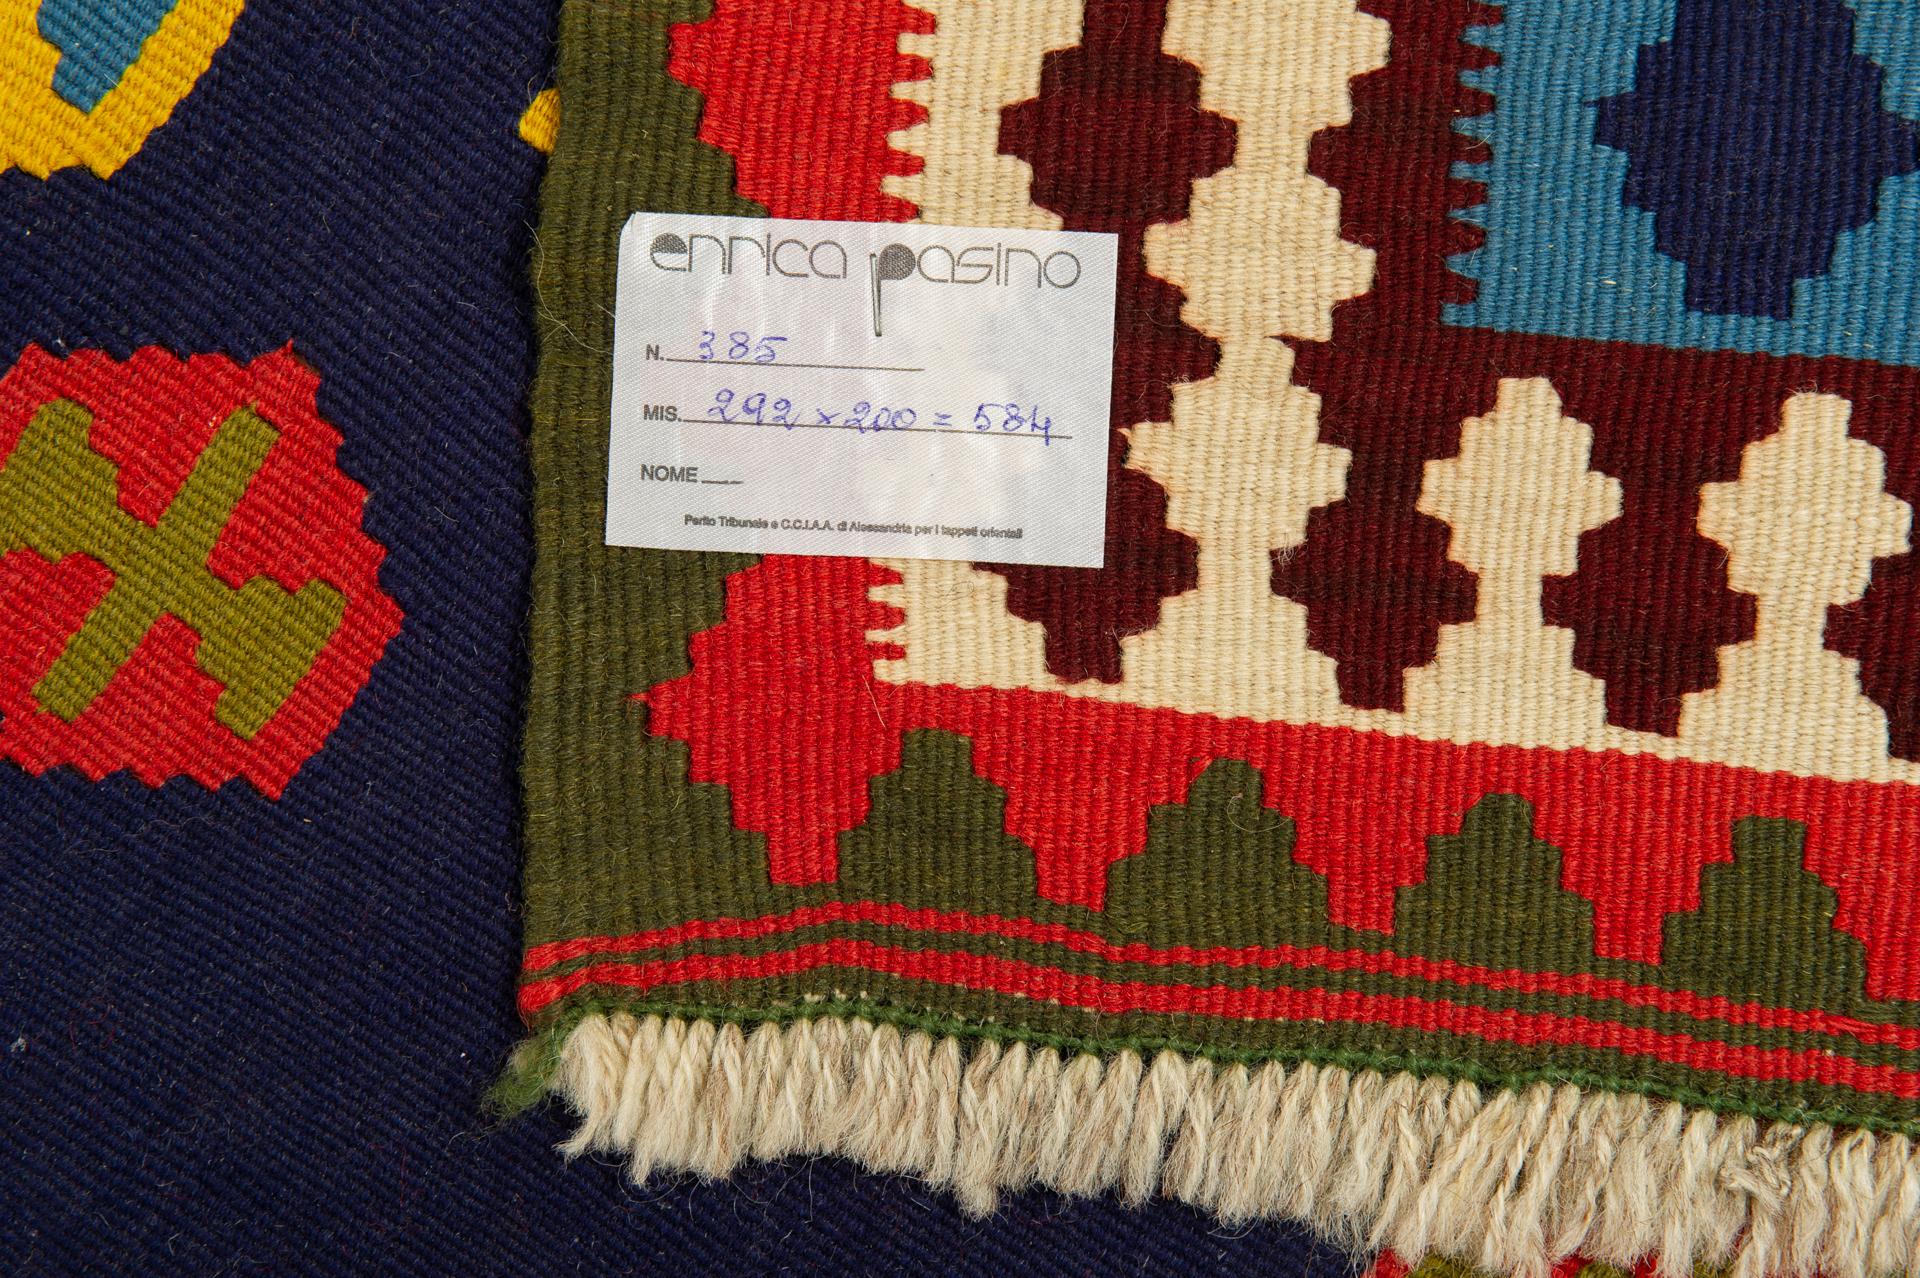 Wonderful kilim with a wonderful price. Beautiful cheerful colors on a blue background: to bring color and good humor to Your home. This had undoubtedly been the weaver's intention.